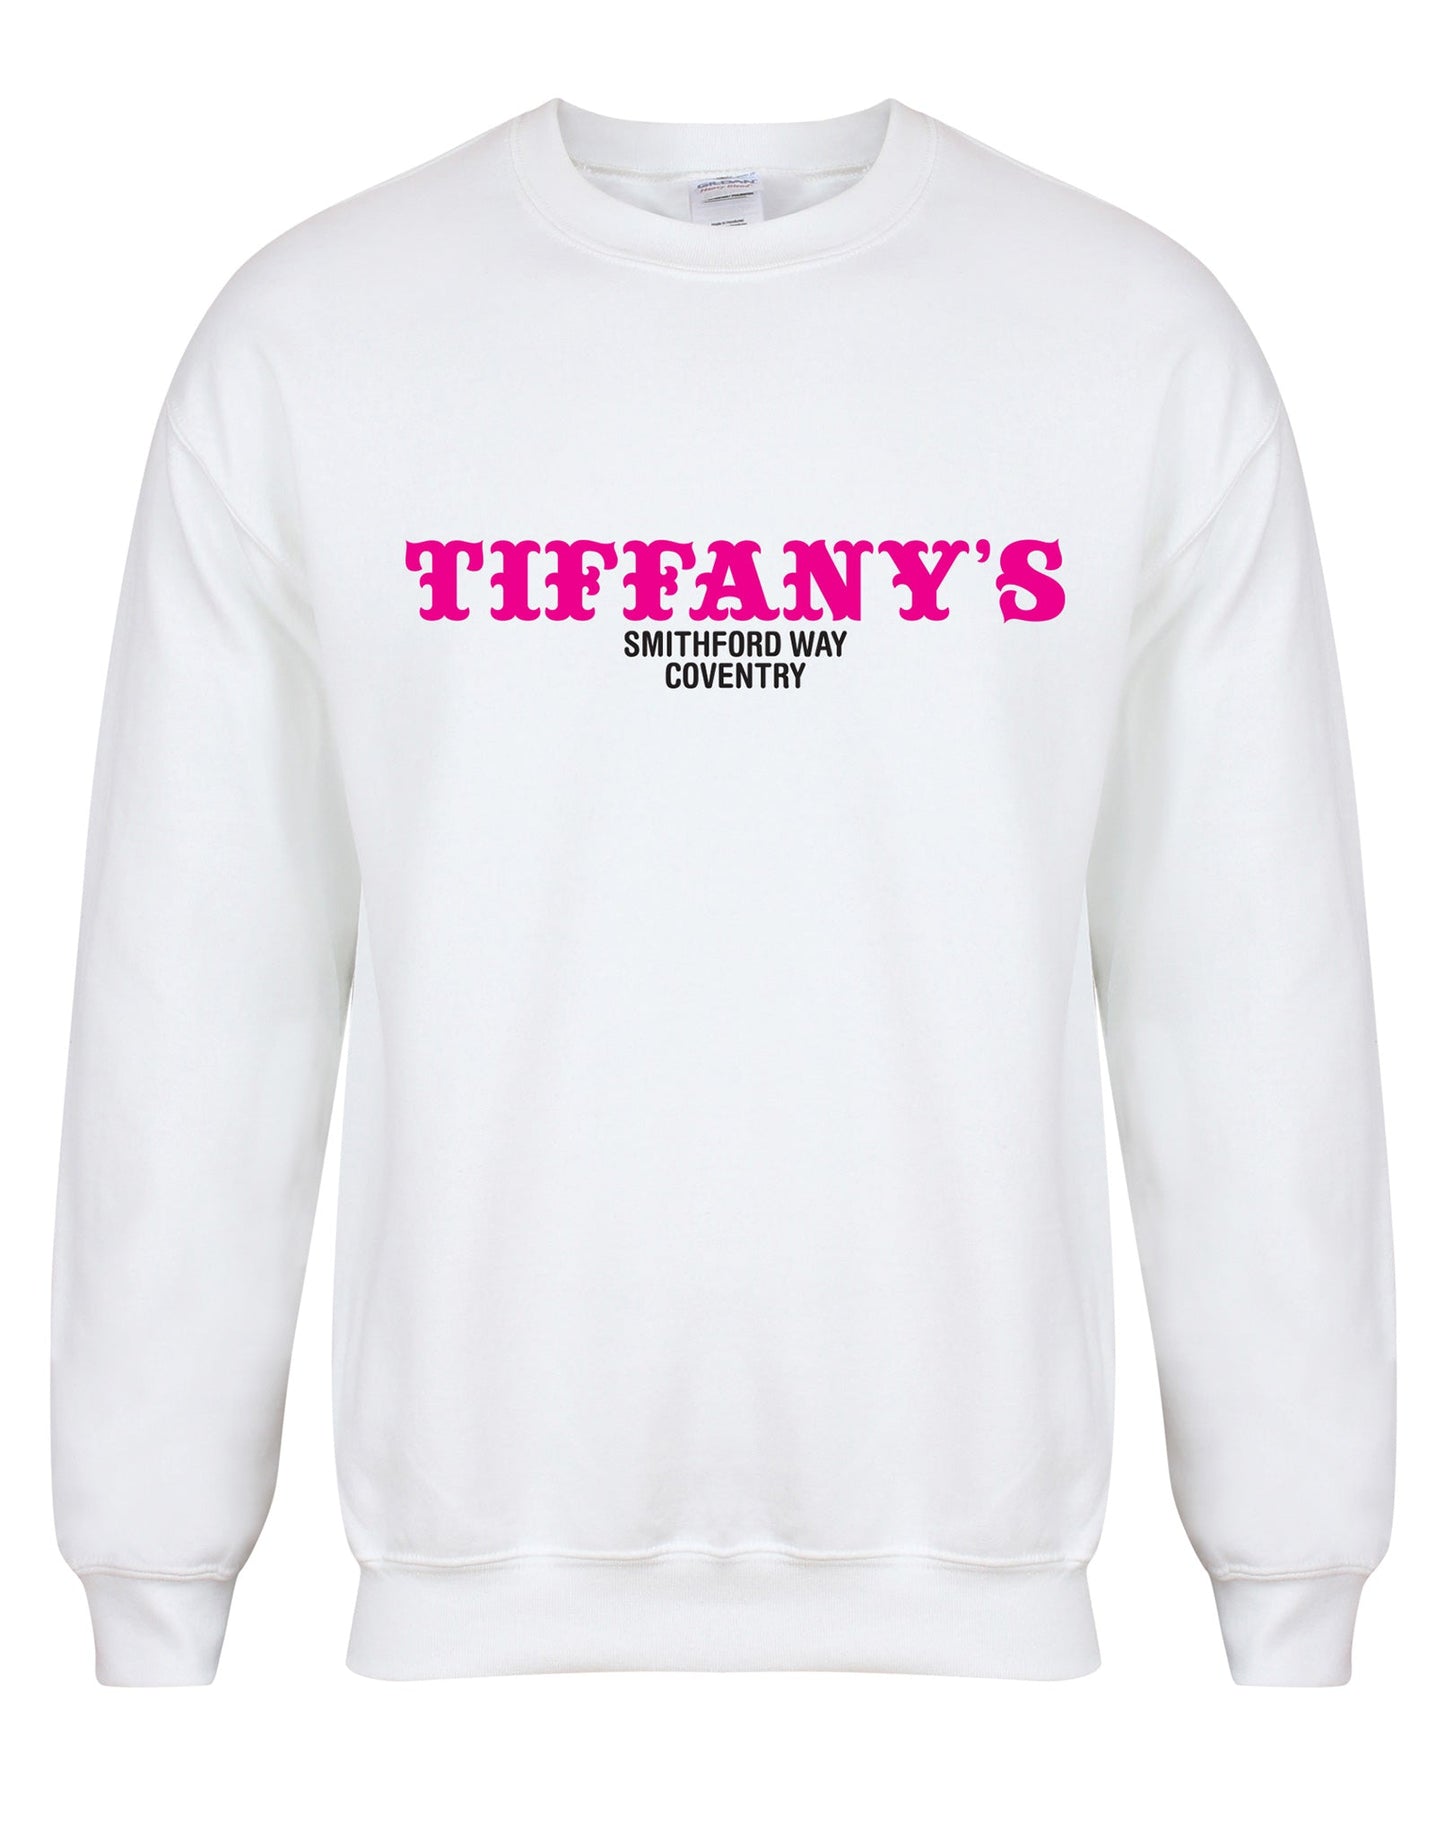 Tiffany's Coventry unisex fit sweatshirt - various colours - Dirty Stop Outs